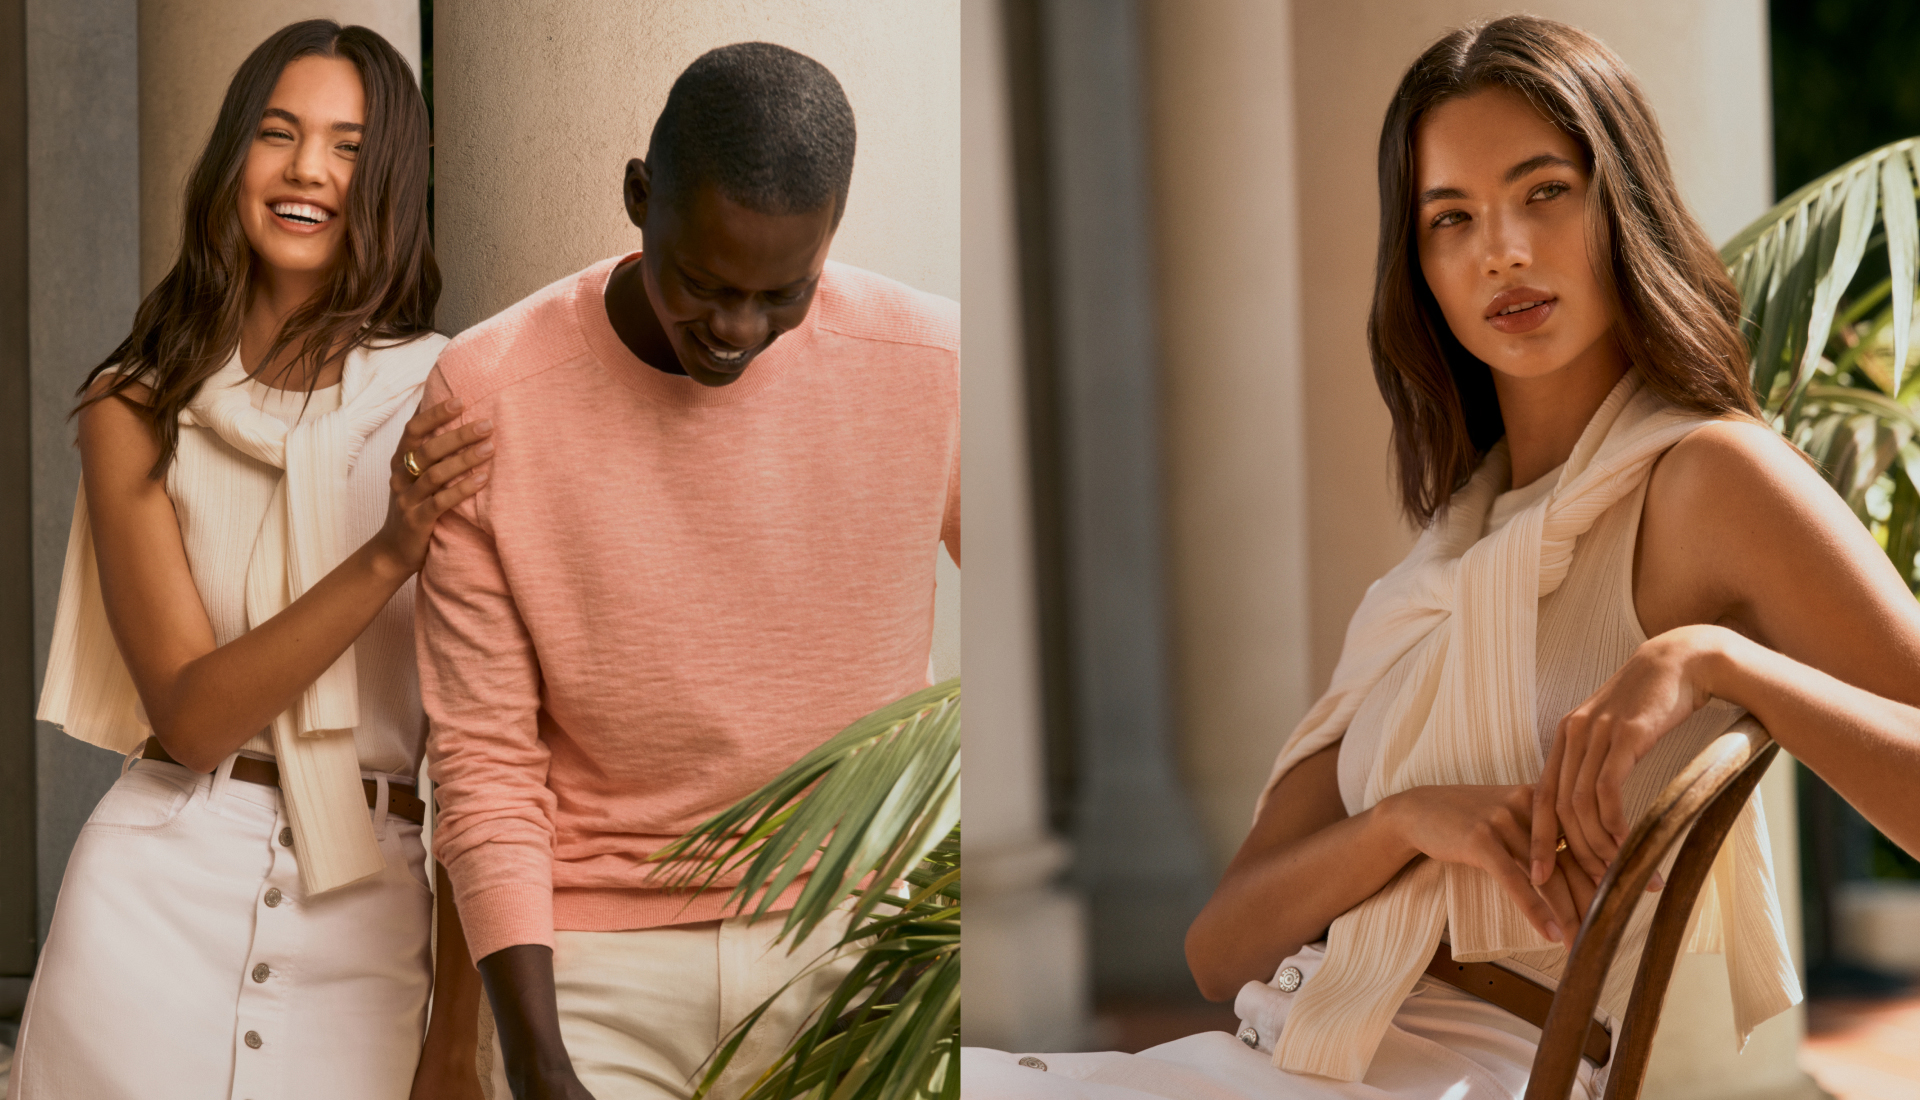 New Arrivals from $25. Greet summer days with versatile new styles made for warm-weather travels, celebratory occasions, and everything else under the sun. Shop Now.